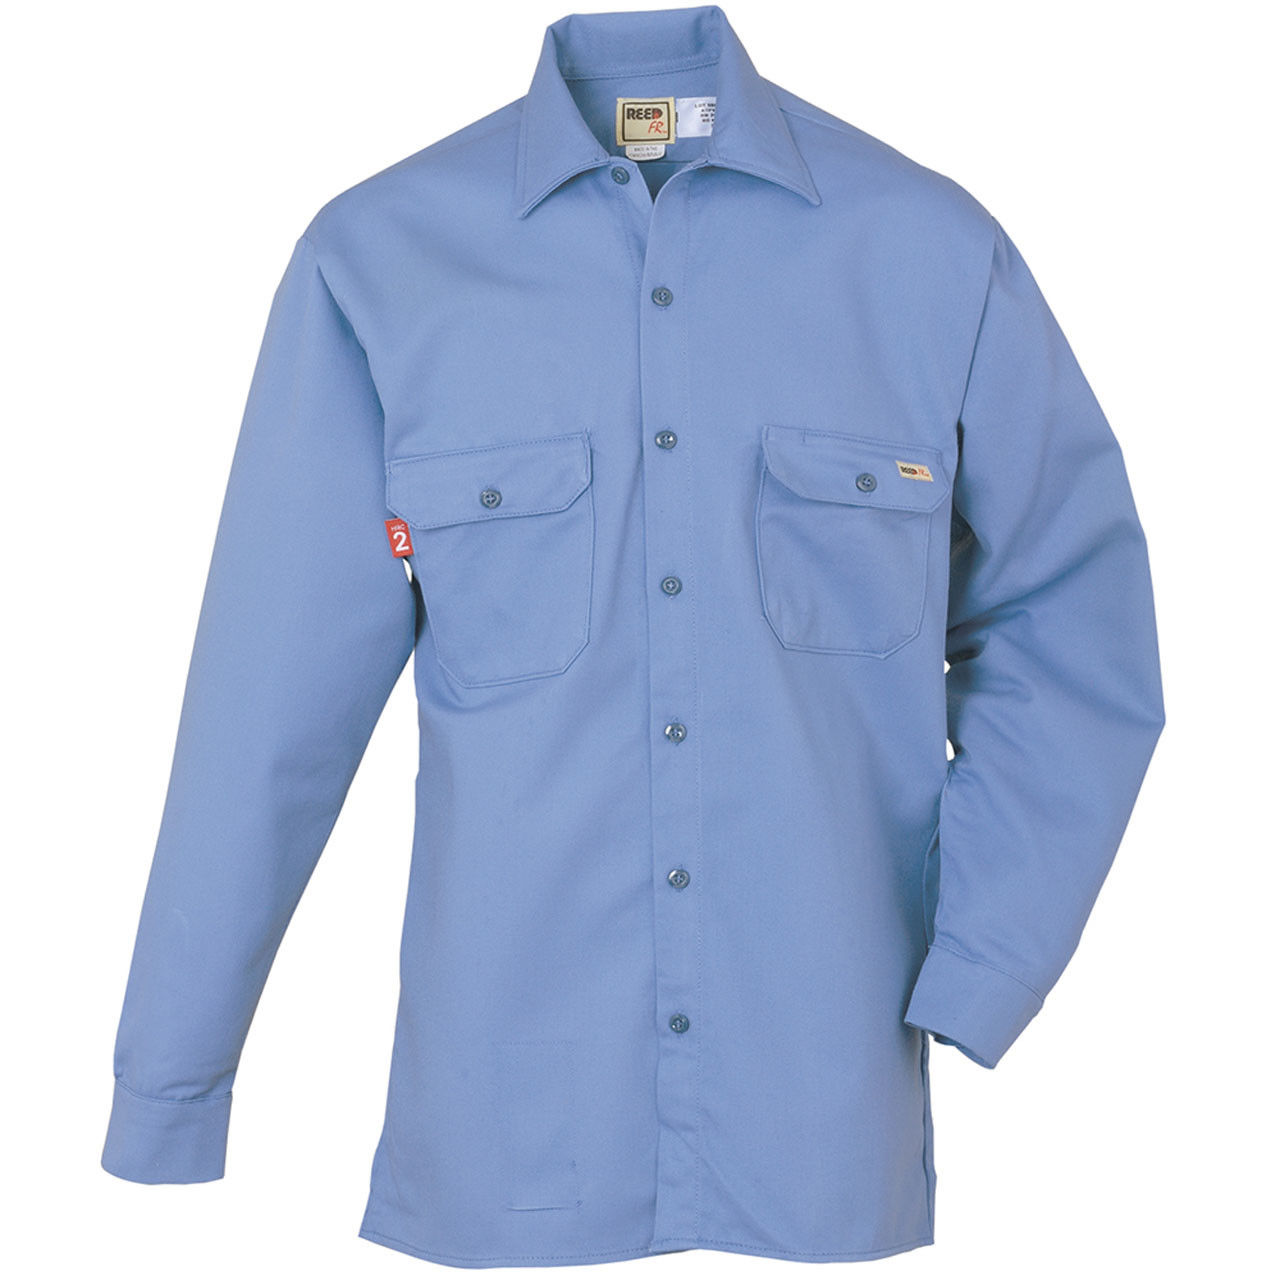 What type of applications are these work shirts suitable for?